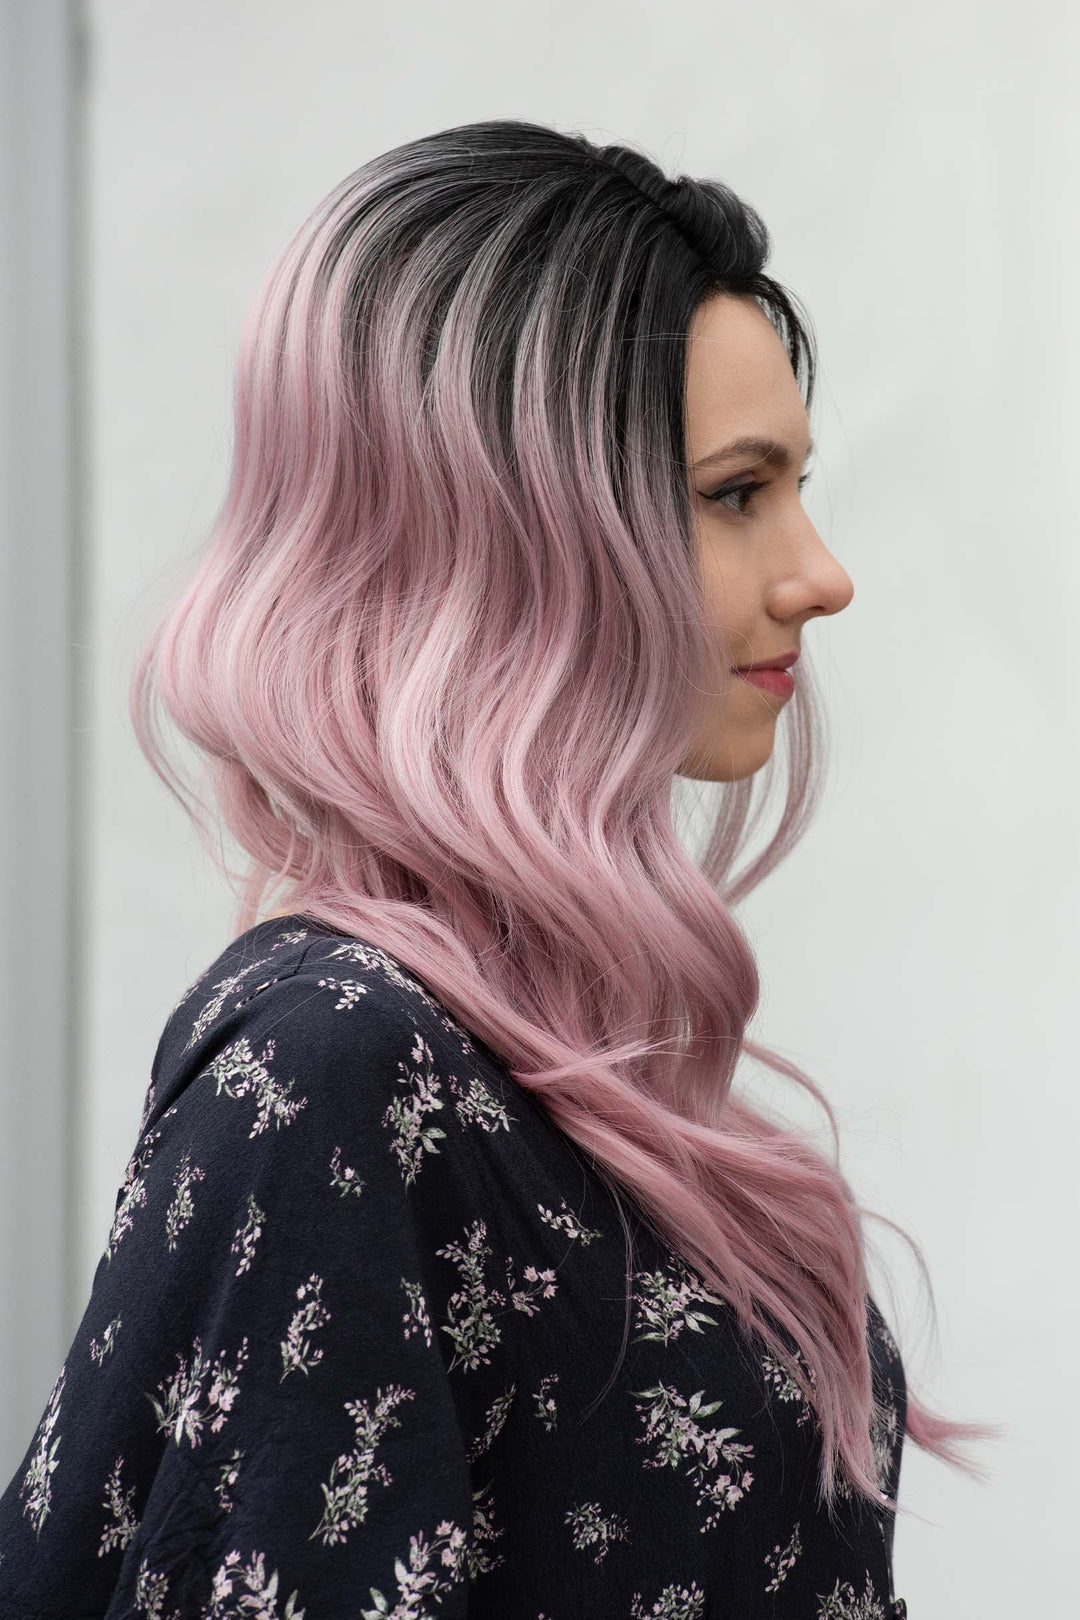 Ashley | Silver/Pink Ombre Lace Front Wig 20"